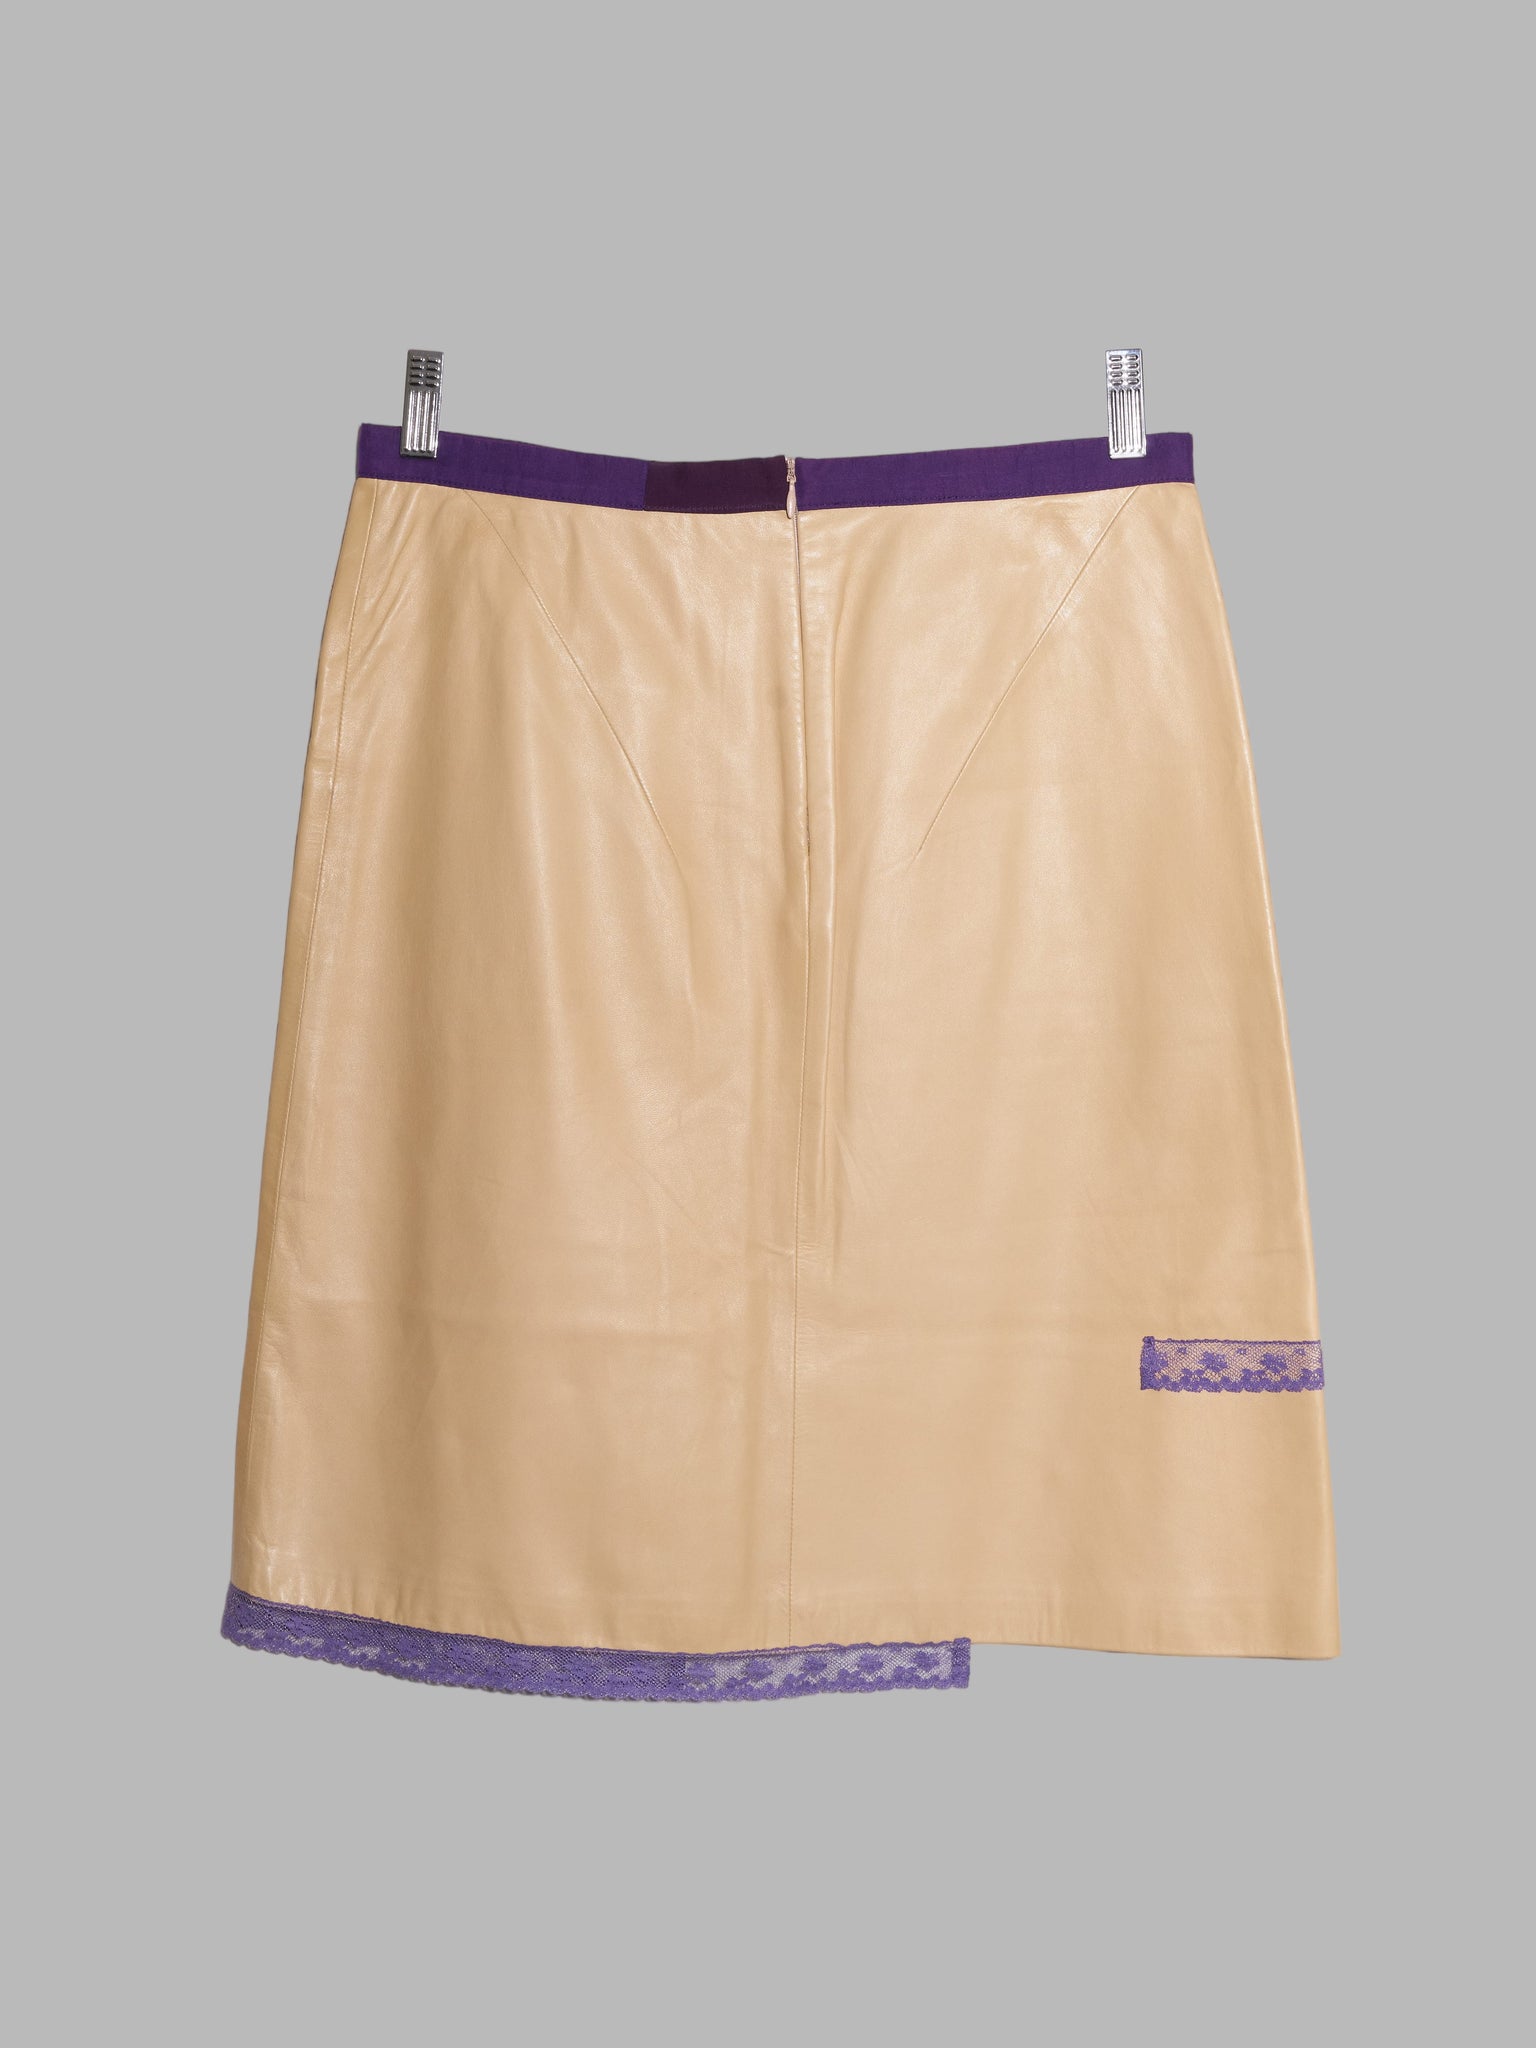 Alessandro Dell’acqua beige leather skirt with purple lace accents - sz 40 IT